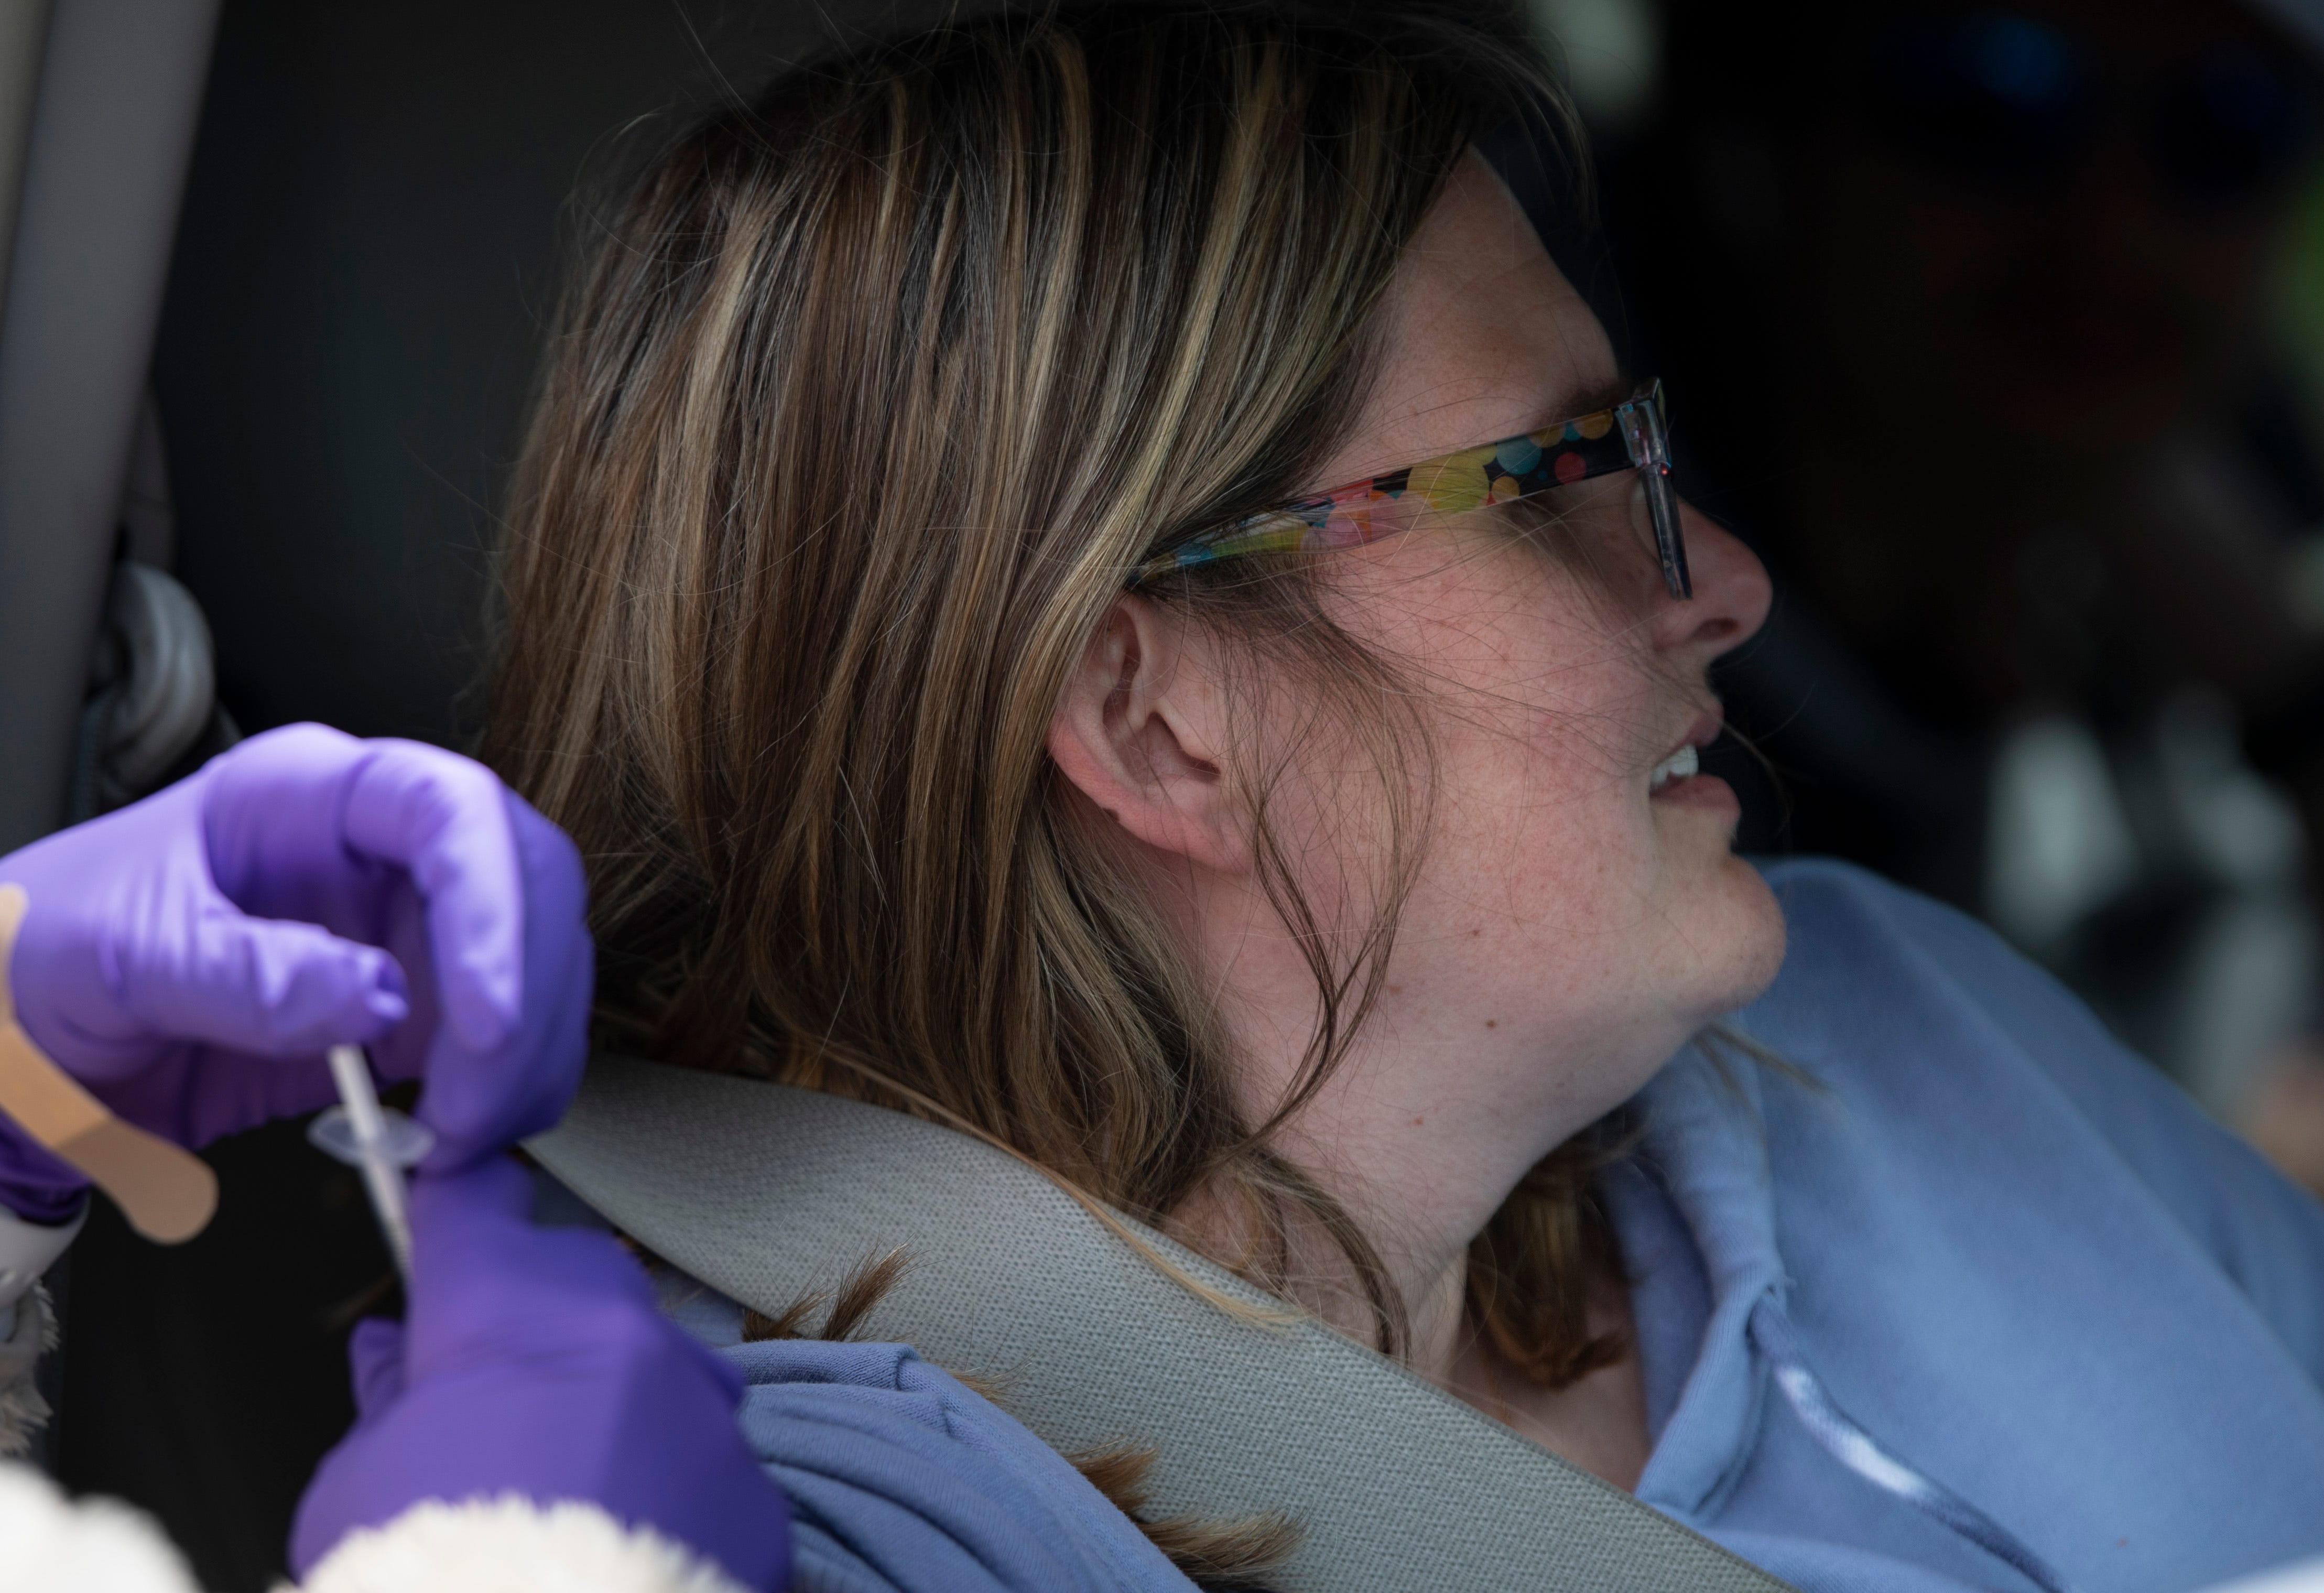 Brianne Slusher, of Portland, Tennessee looks away as she receives a COVID-19 vaccine at a pop-up vaccination clinic on April 22, 2021. The church partnered with Adhere Rx to boost the vaccination efforts in the rural area.